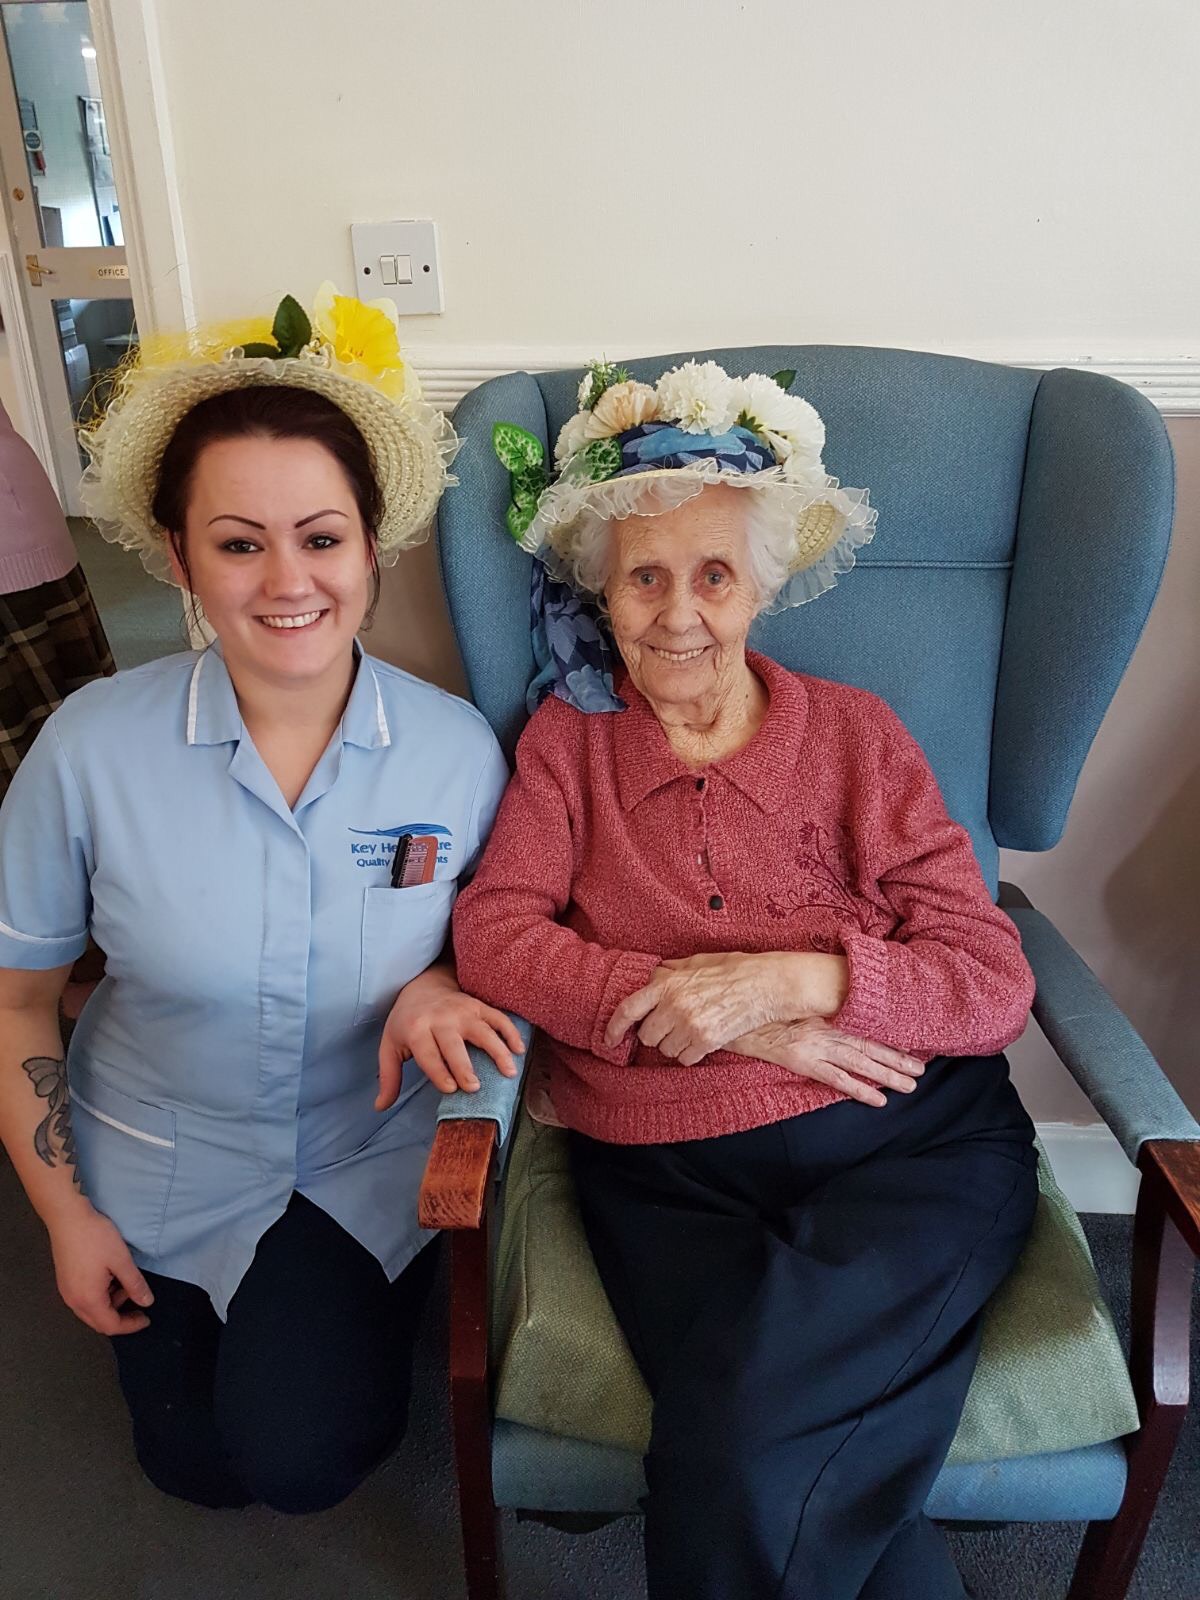 Easter Bonnets 2017: Key Healthcare is dedicated to caring for elderly residents in safe. We have multiple dementia care homes including our care home middlesbrough, our care home St. Helen and care home saltburn. We excel in monitoring and improving care levels.